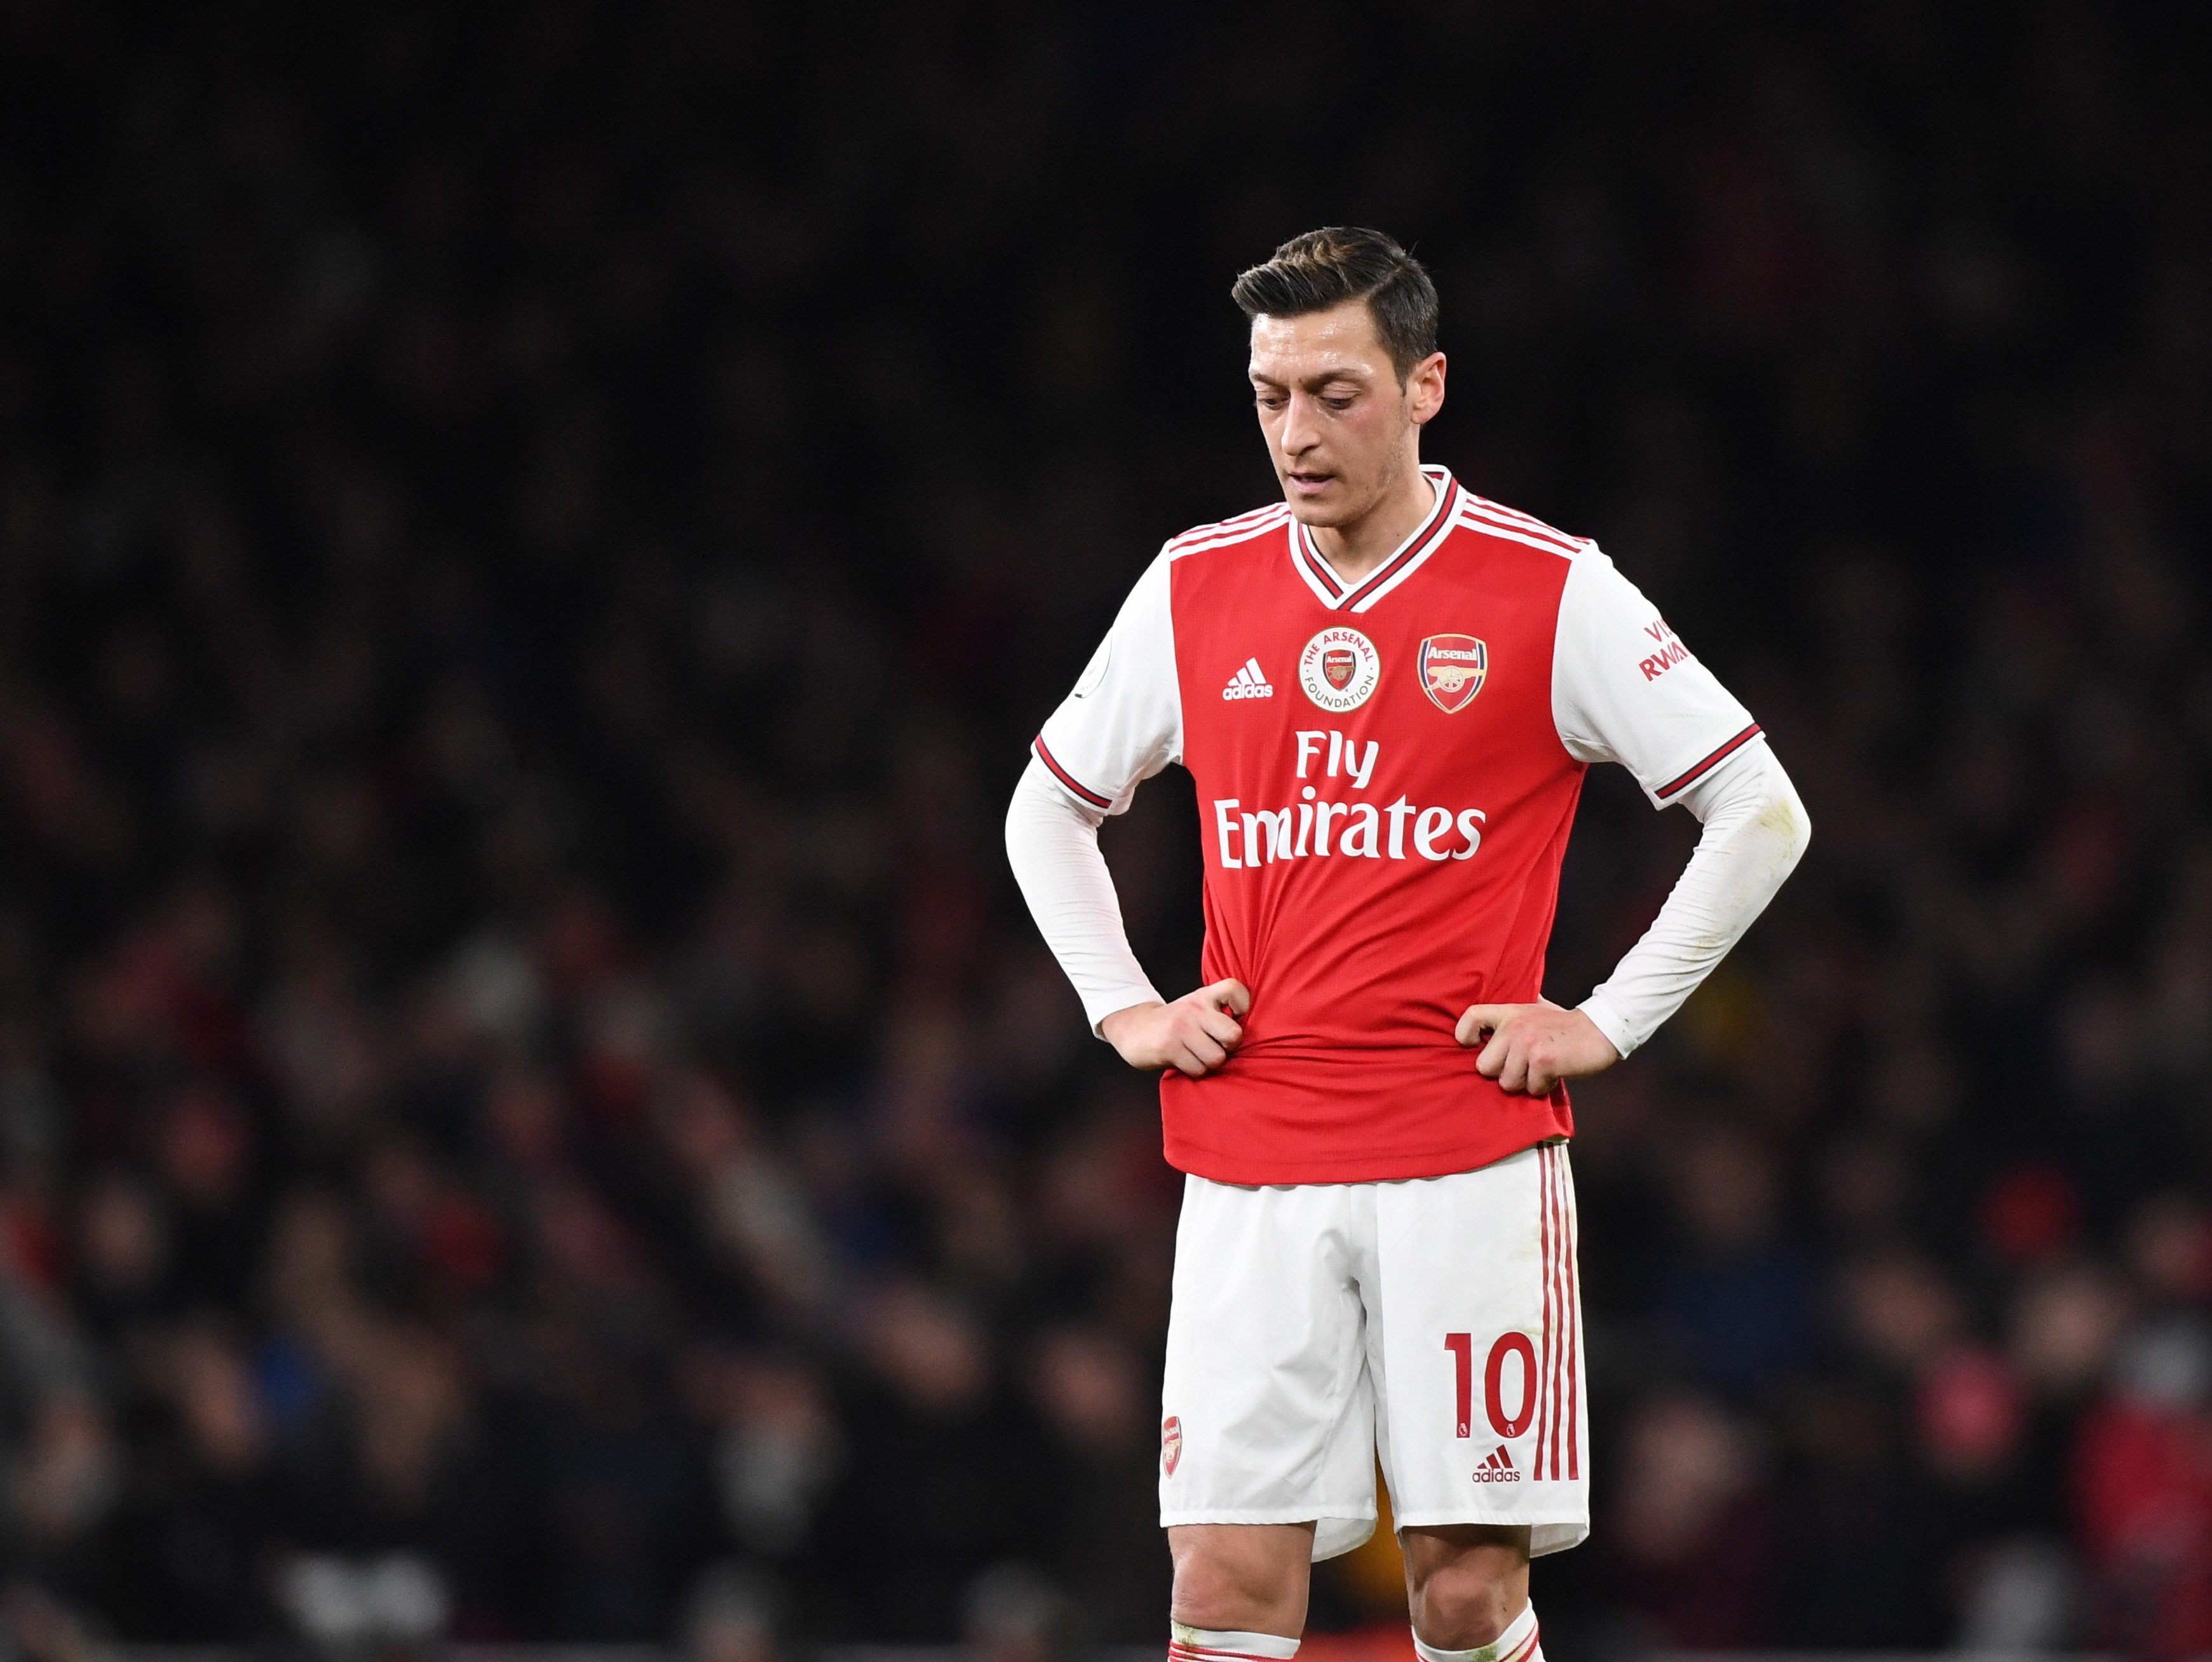 Arsenal's Mesut Ozil takes a breather during the English Premier league soccer match between Arsenal and Manchester City in London on Sunday. Ozil has a new fan in US Secretary of State Mike Pompeo, who has praised his criticism of China concerning its treatment of Uygurs in Xinjiang. Photo: EPA-EFE